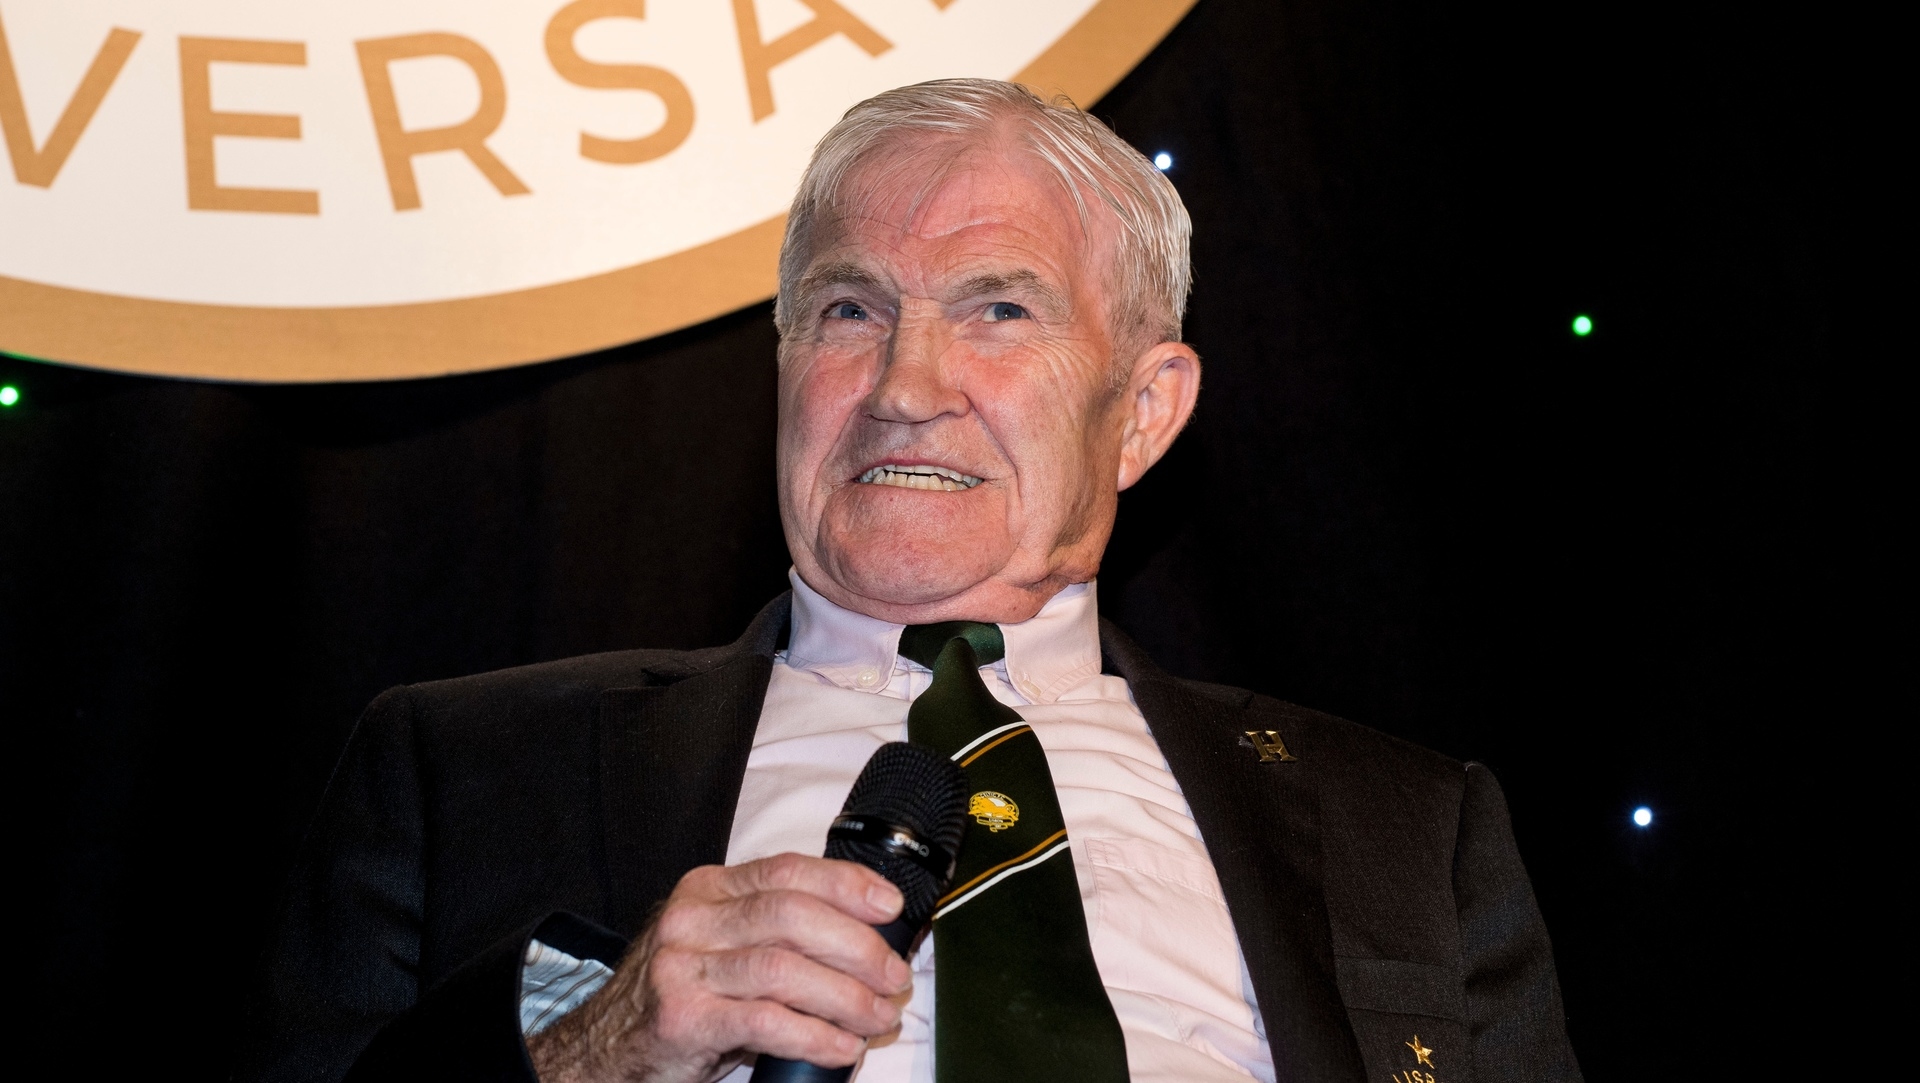 Bertie Auld was a prominent Celtic ambassador in his later years.